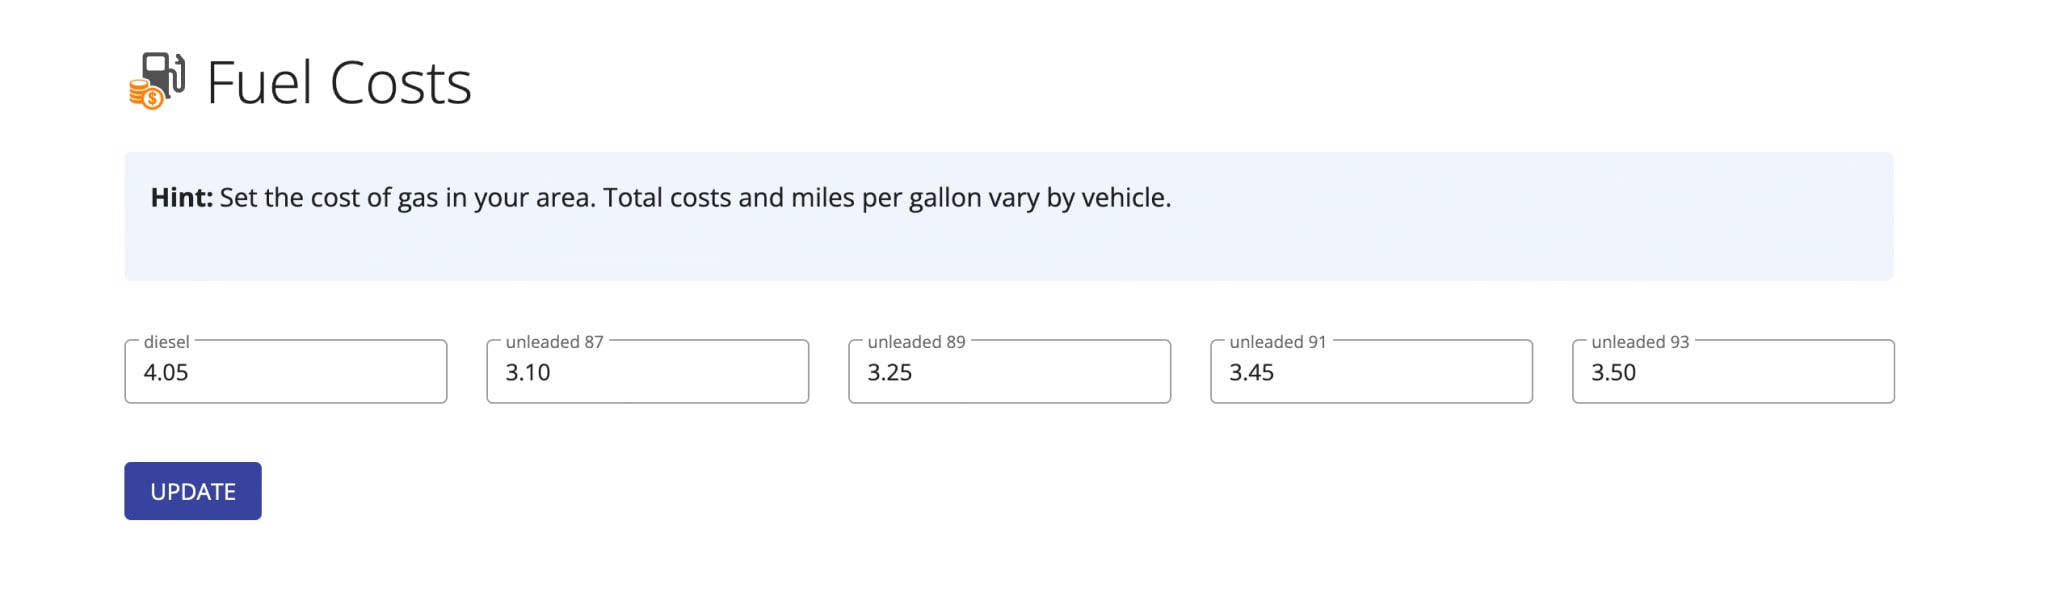 Add fuel, petrol, gas, or diesel prices to calculate vehicle fuel consumption and fuel costs on optimized routes. 